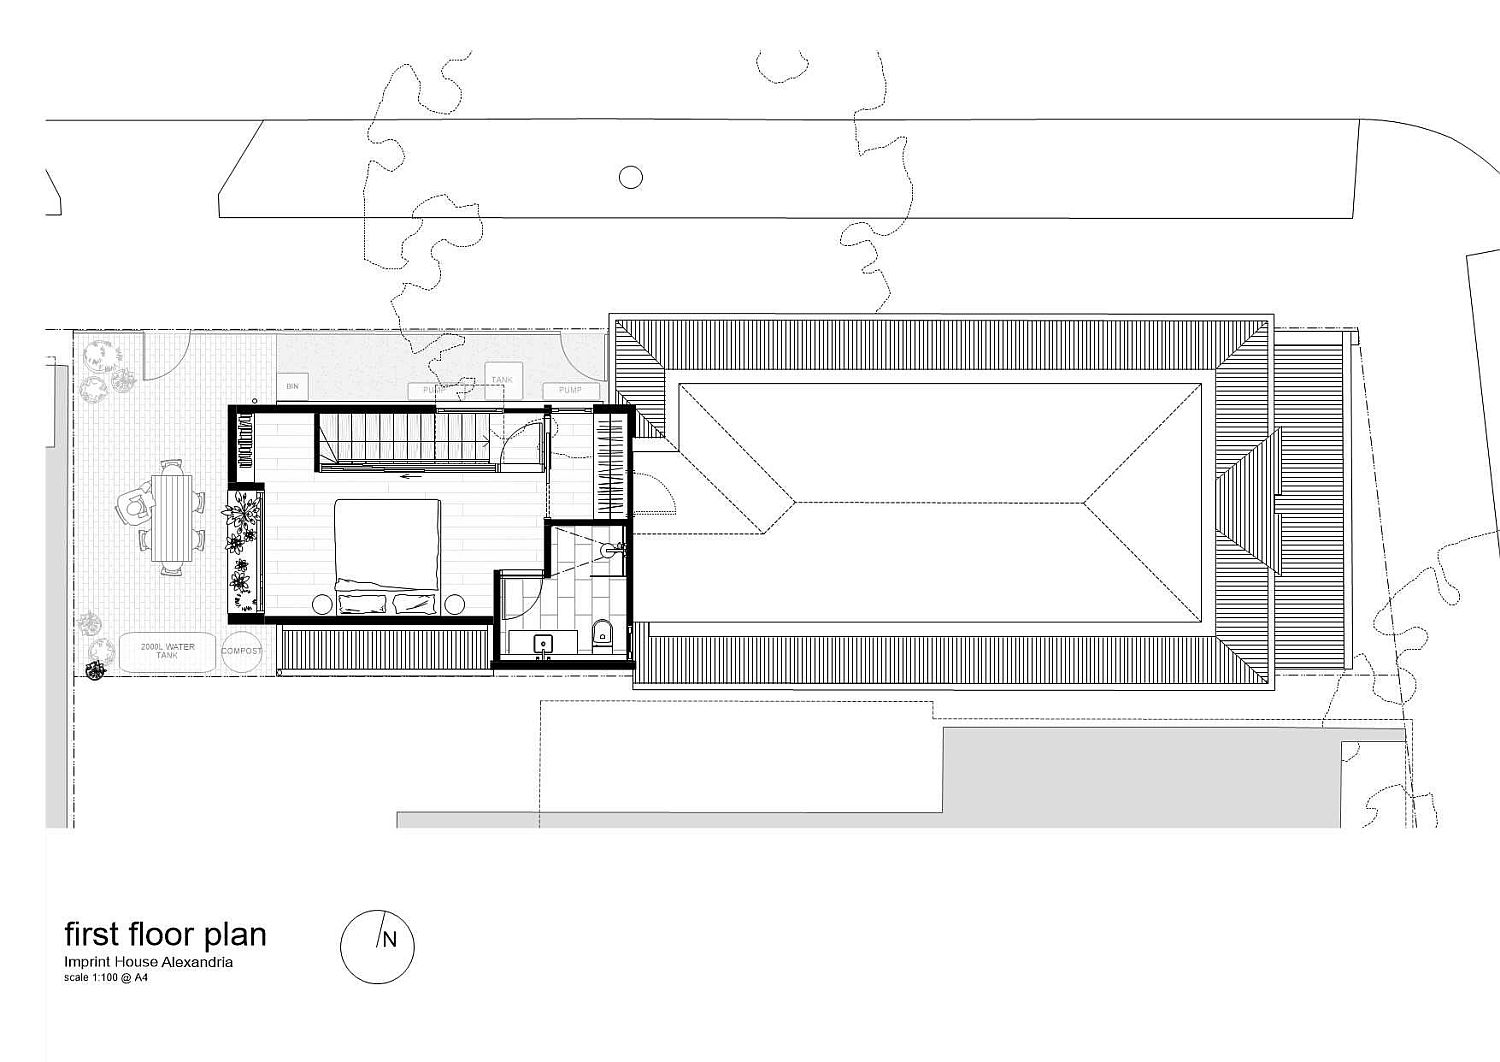 First-floor-plan-of-the-revamped-terrace-house-in-Sydney